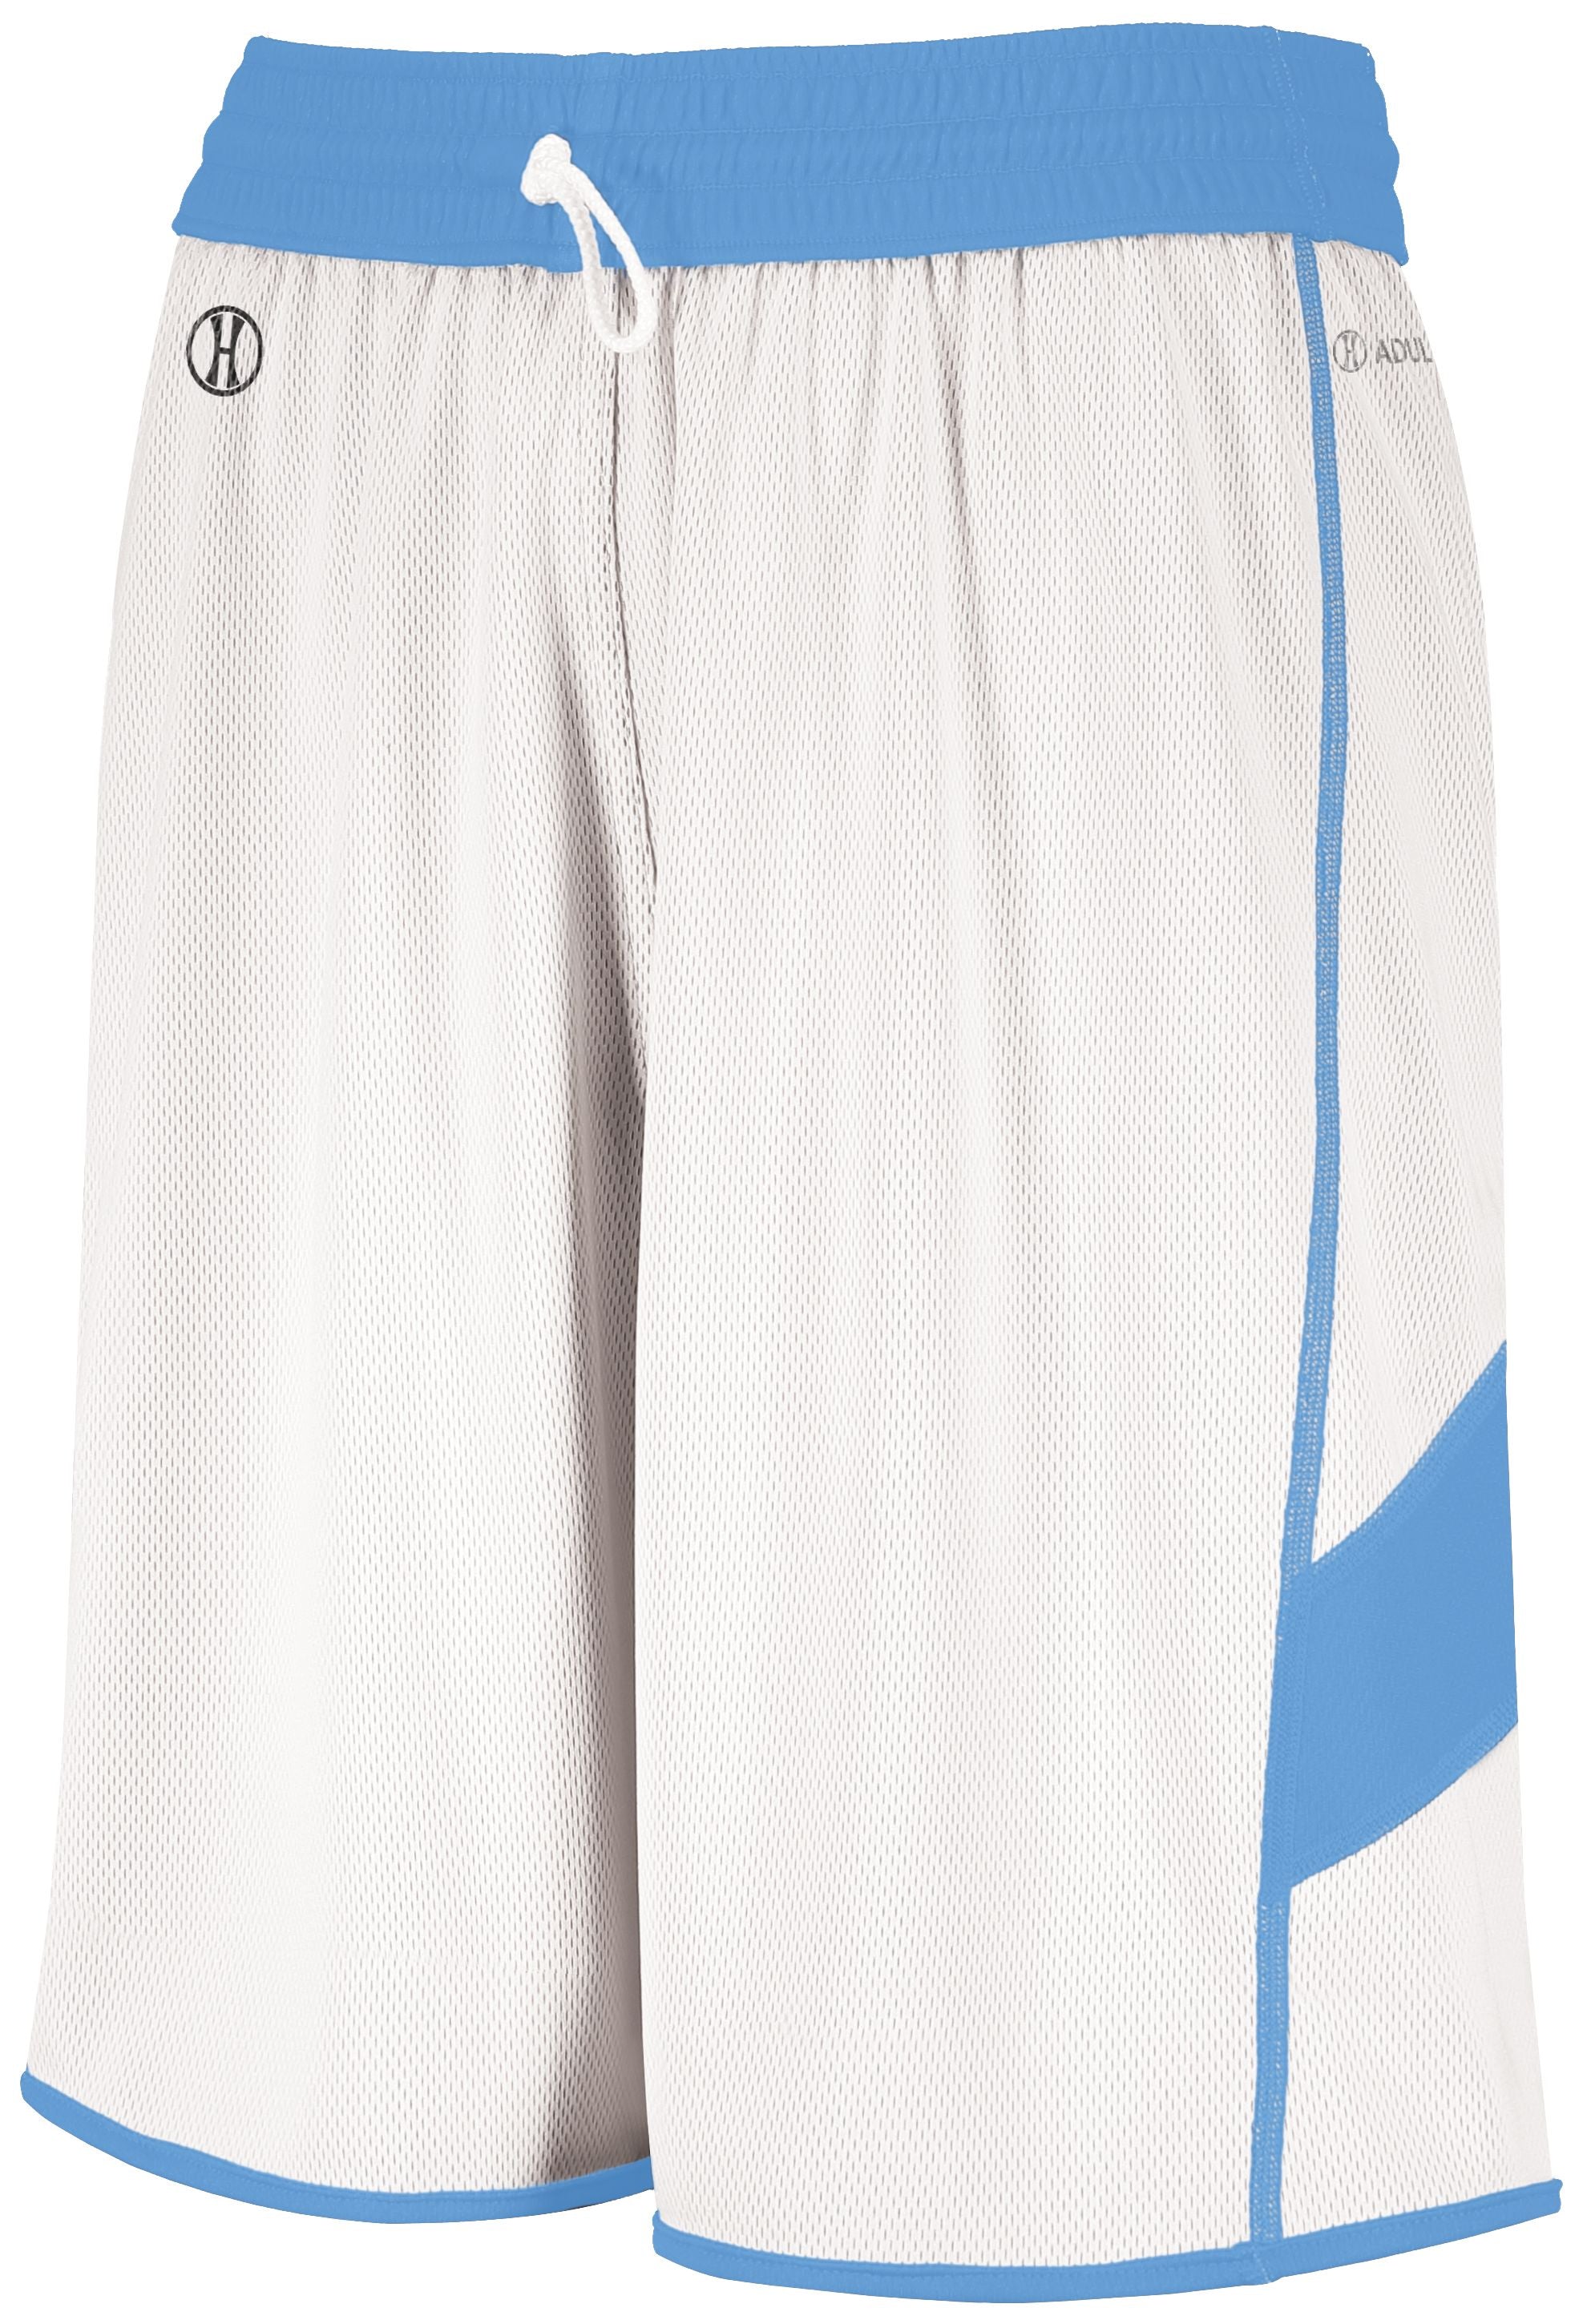 Holloway Youth Dual-Side Single Ply Basketball Shorts in University Blue/White  -Part of the Youth, Youth-Shorts, Basketball, Holloway, All-Sports, All-Sports-1 product lines at KanaleyCreations.com